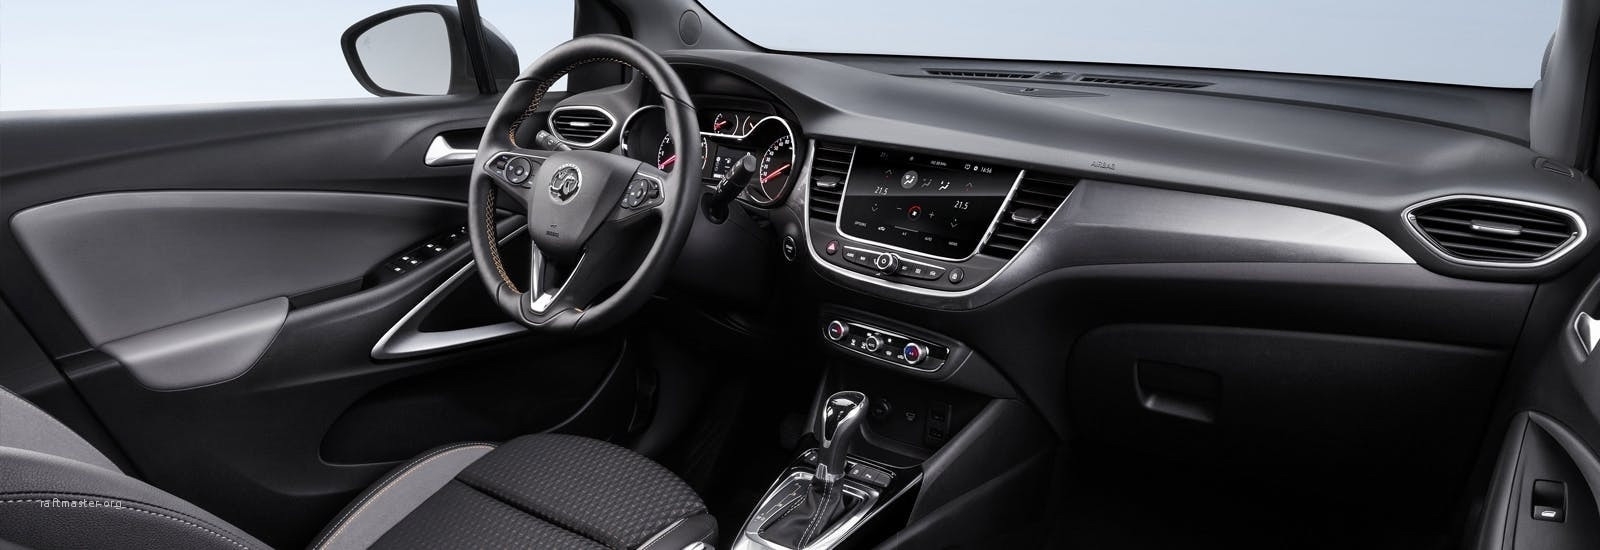 New Opel Corsa 120 Years Edition 2019 Review Interior Exterior 